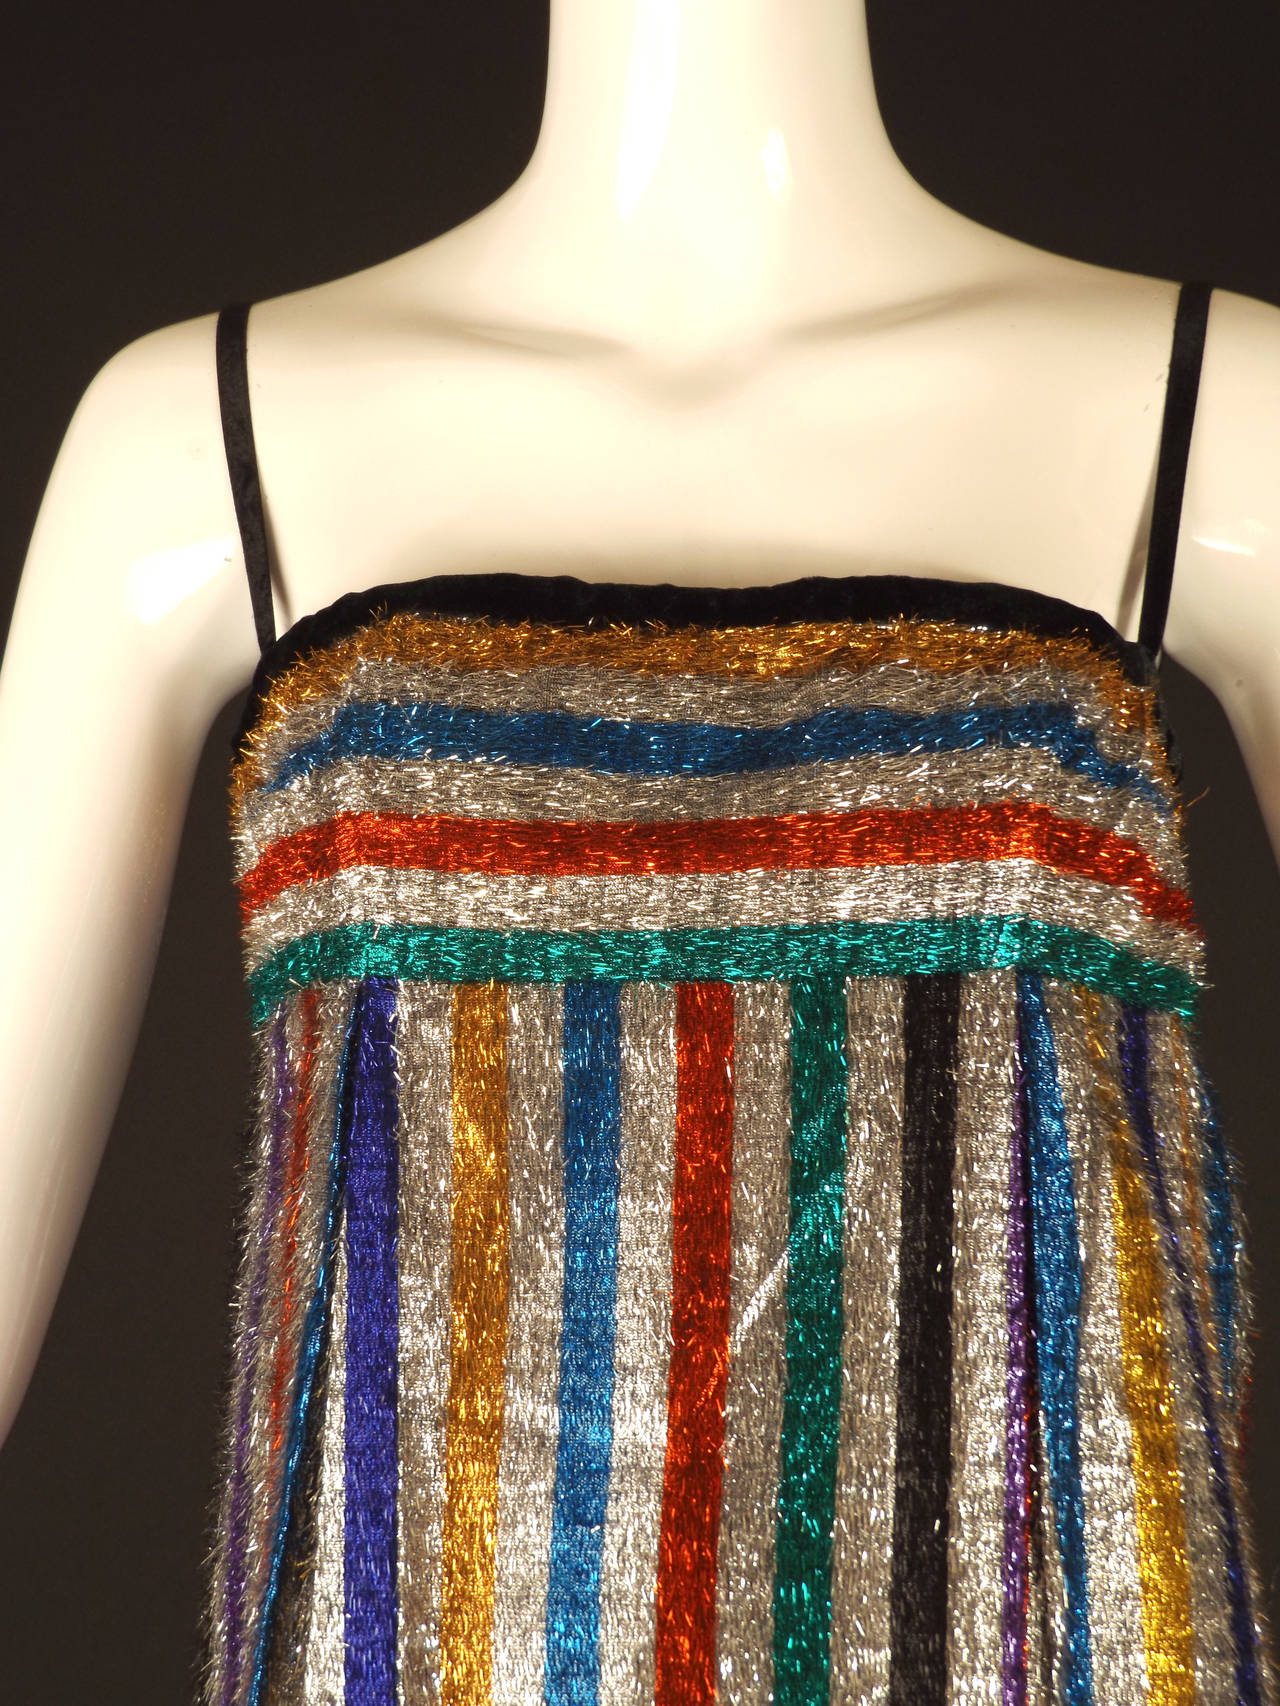 FABULOUS 1960s evening dress in a stripe eyelash lamé. The stripes are silver with a red, black, green, purple, turquoise and yellow. Black velvet ribbon shoulder straps and binding along the top edge. The dress has an Empire waistline and is dart